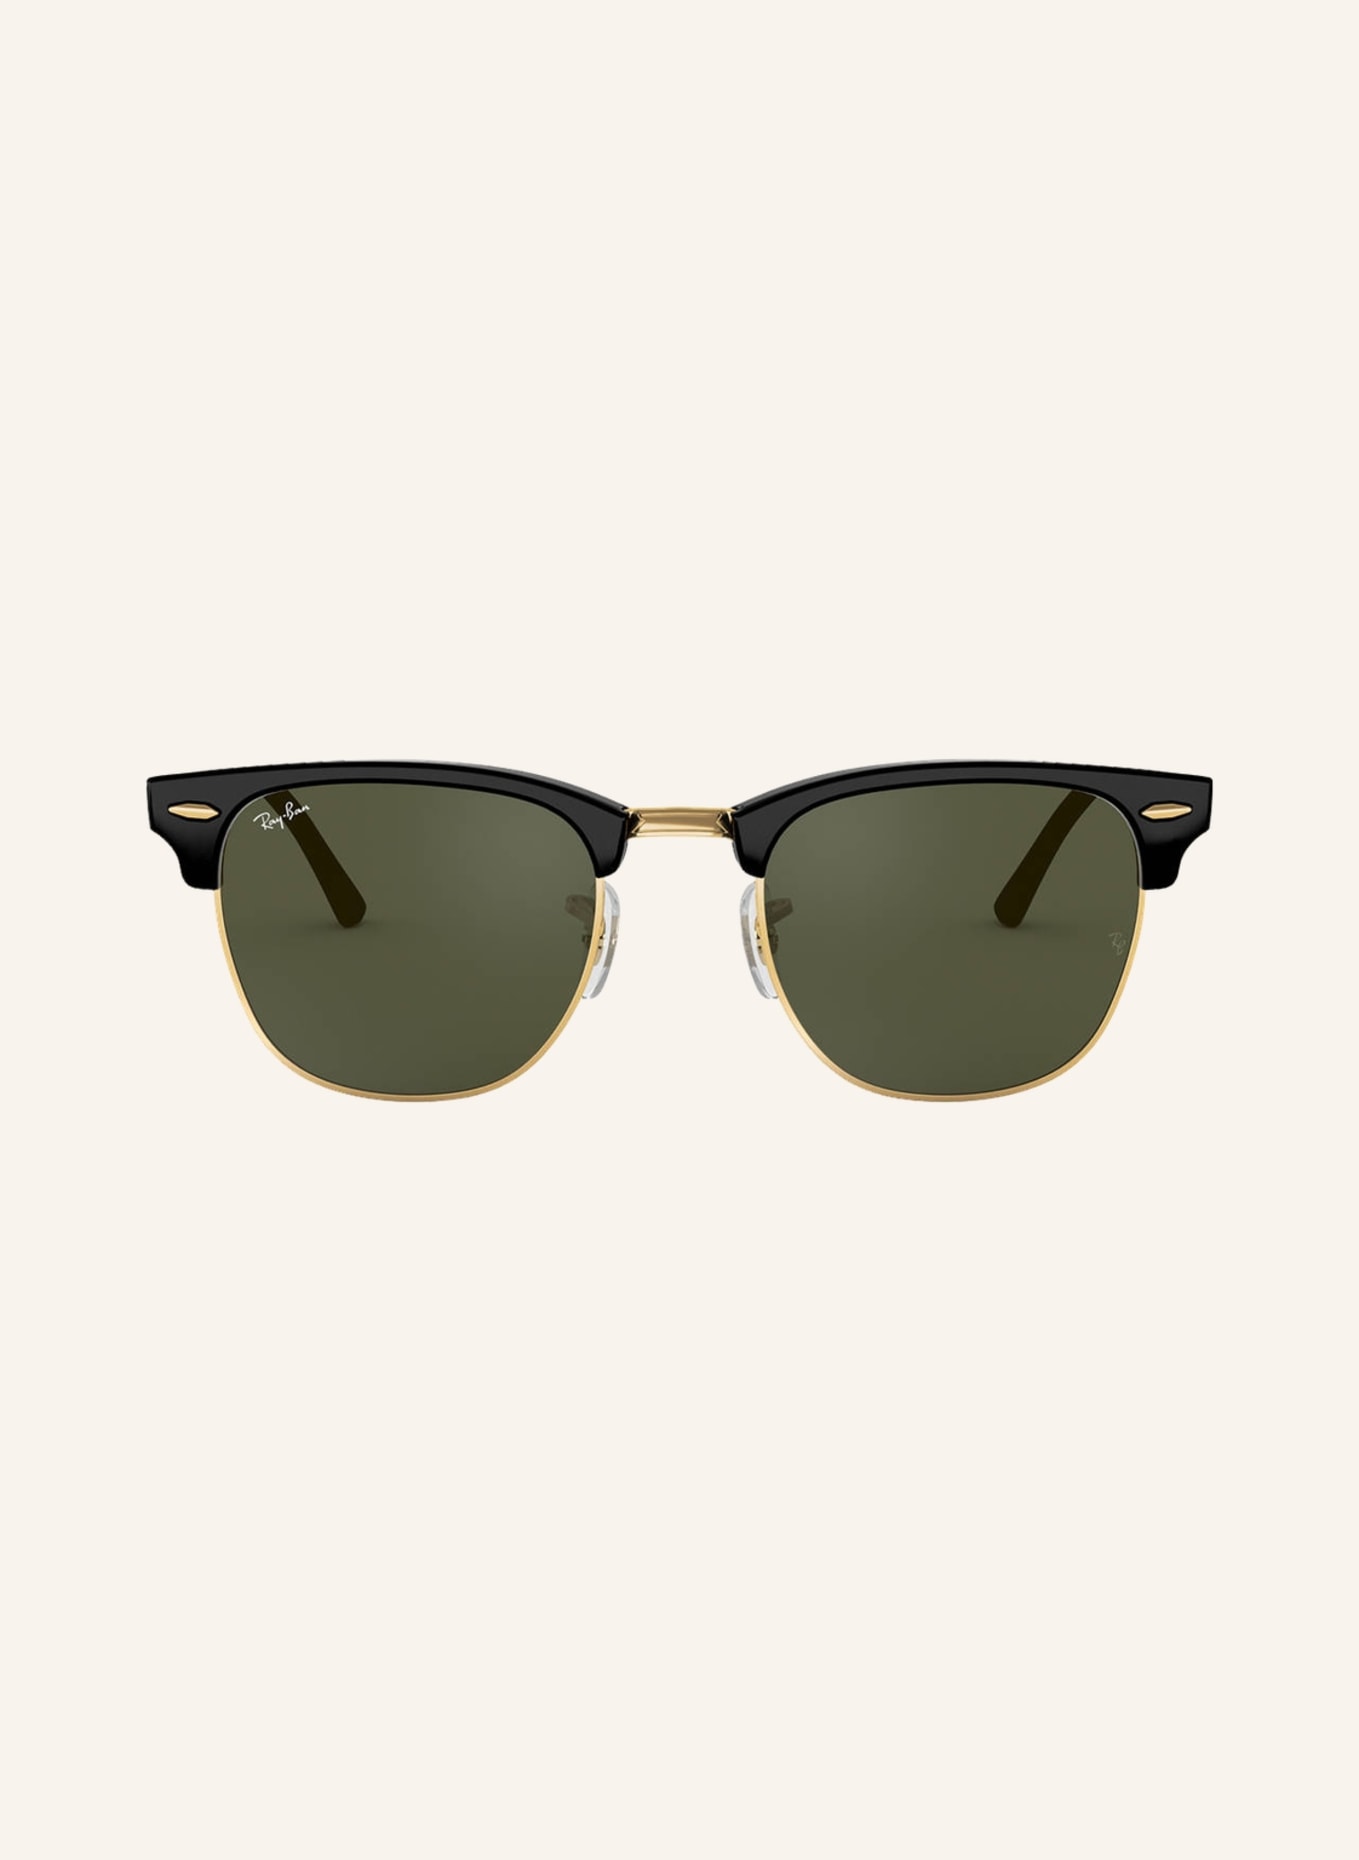 Ray-Ban Sunglasses RB3016 CLUBMASTER, Color: W0365 - BLACK/GOLD / DARK GREEN (Image 2)